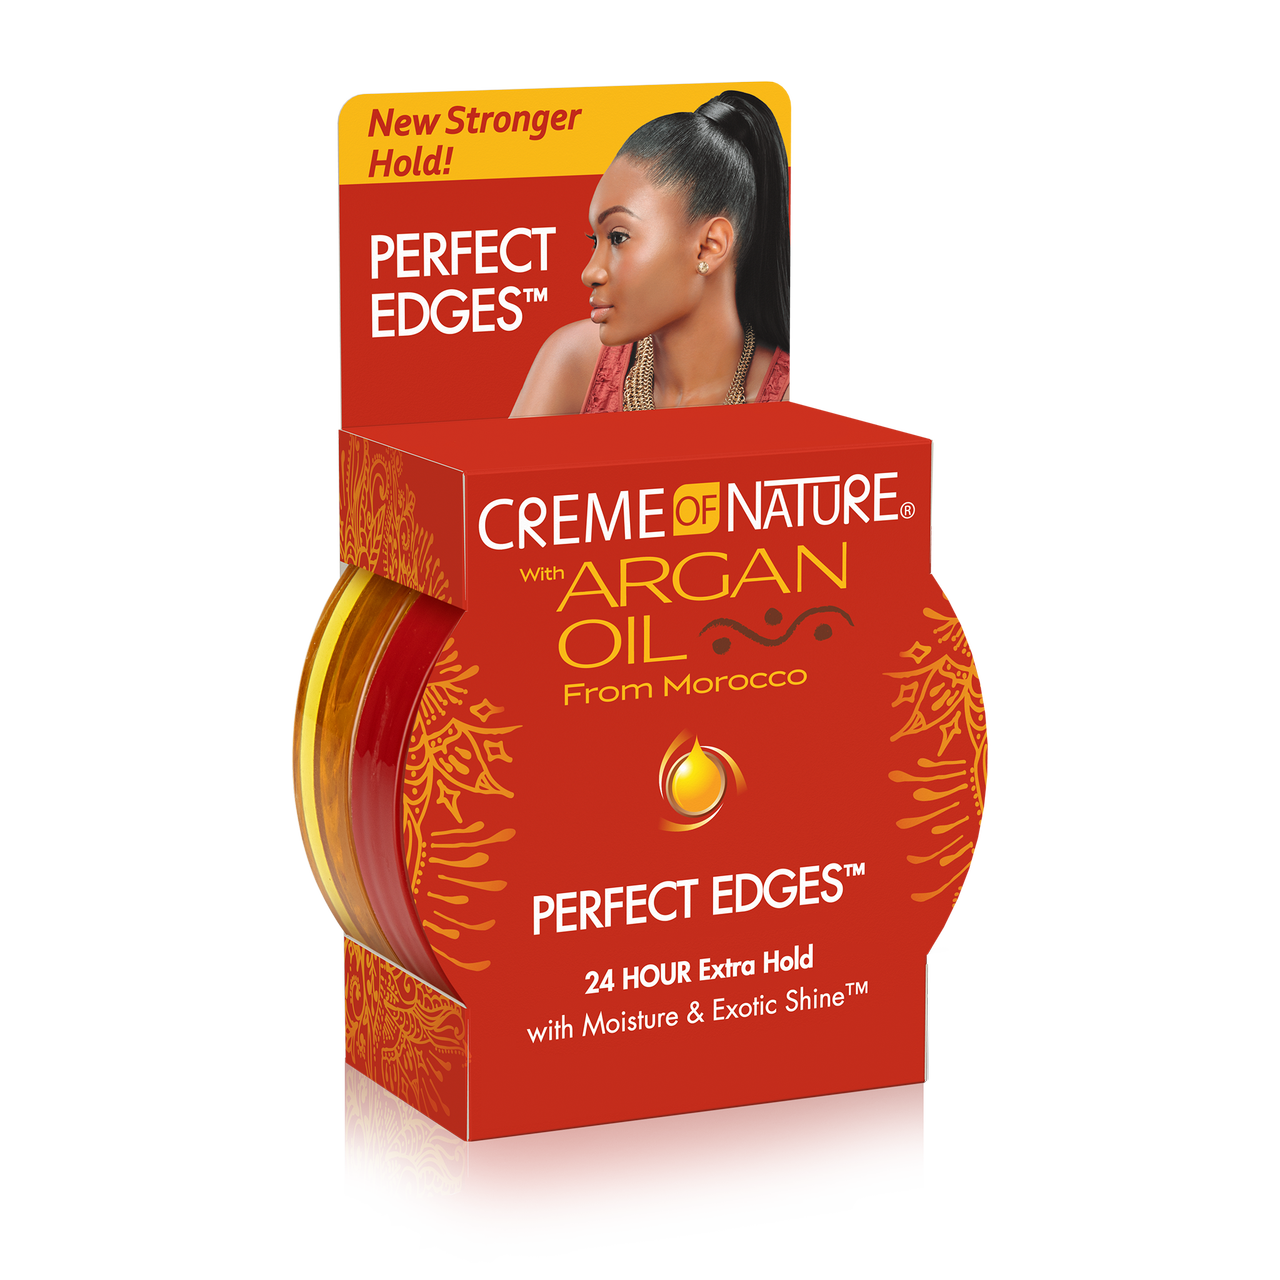 Creme of Nature® Argan Oil from Morocco Perfect Edges™ - Creme of Nature®